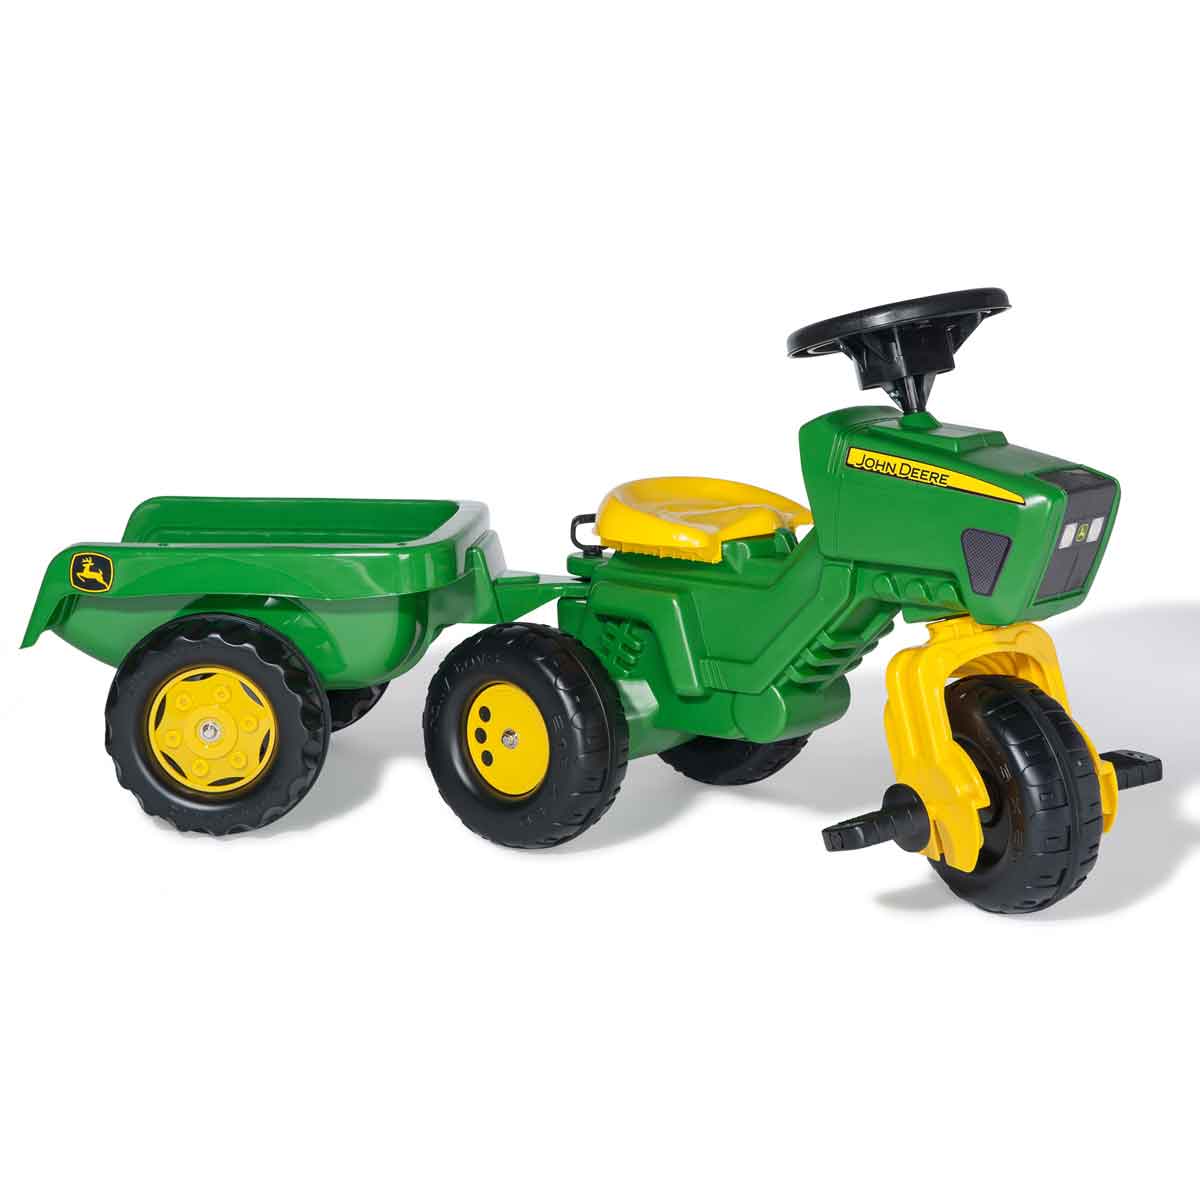 Rolly Toys John Deer Trio Trac Ride On Tractor with Electronic Steering Wheel and Trailer, Green